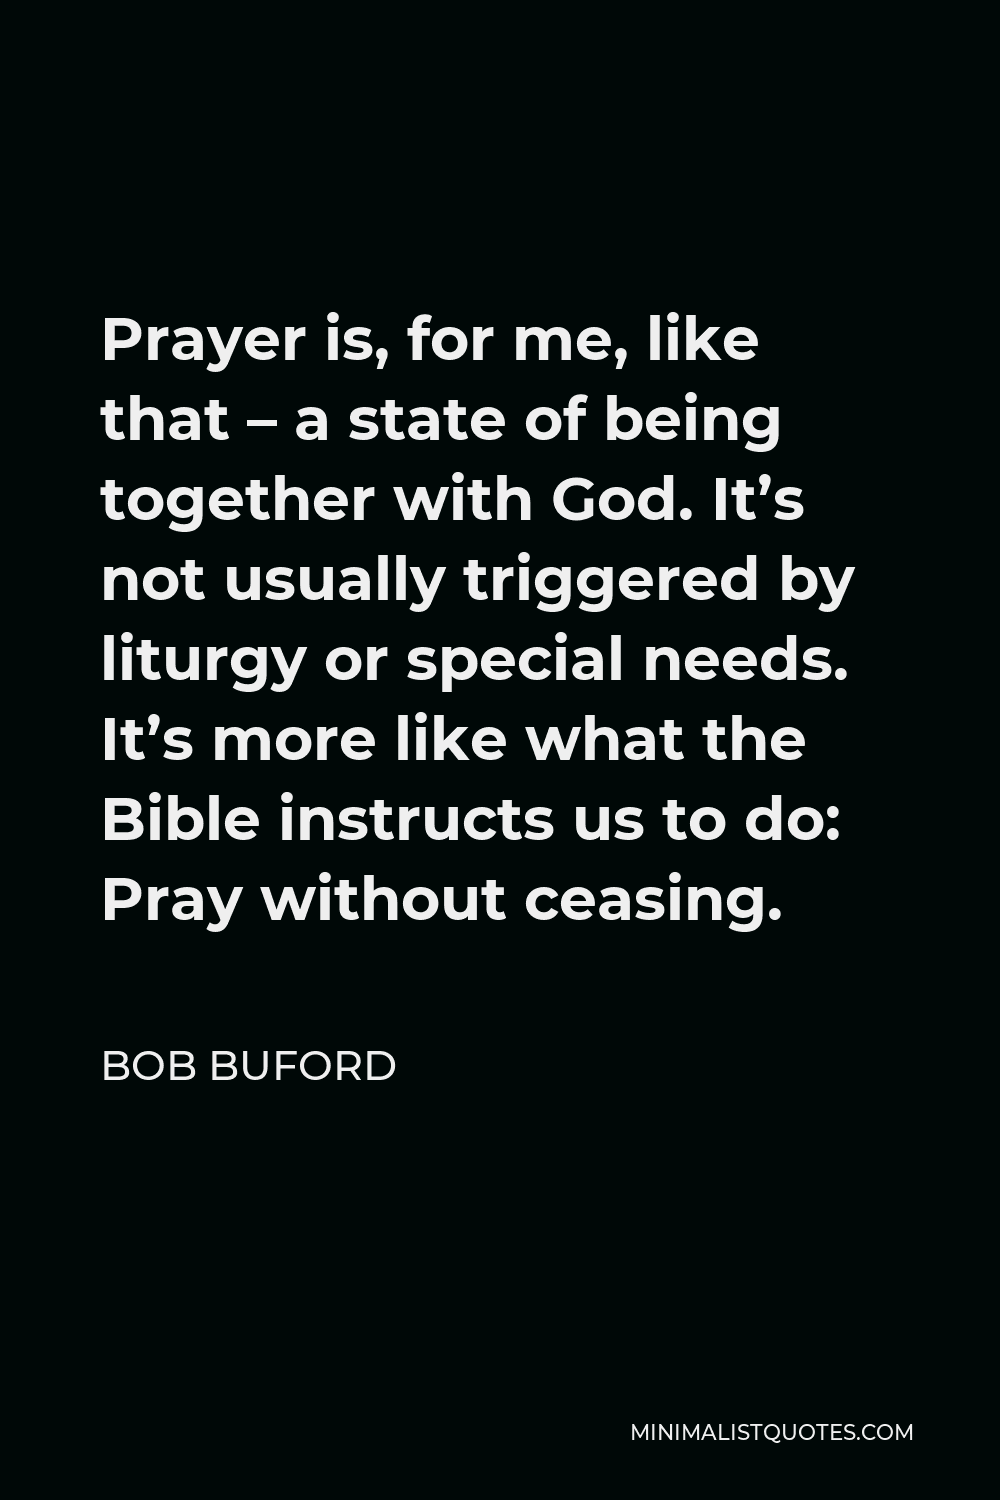 Bob Buford Quote - Prayer is, for me, like that – a state of being together with God. It’s not usually triggered by liturgy or special needs. It’s more like what the Bible instructs us to do: Pray without ceasing.